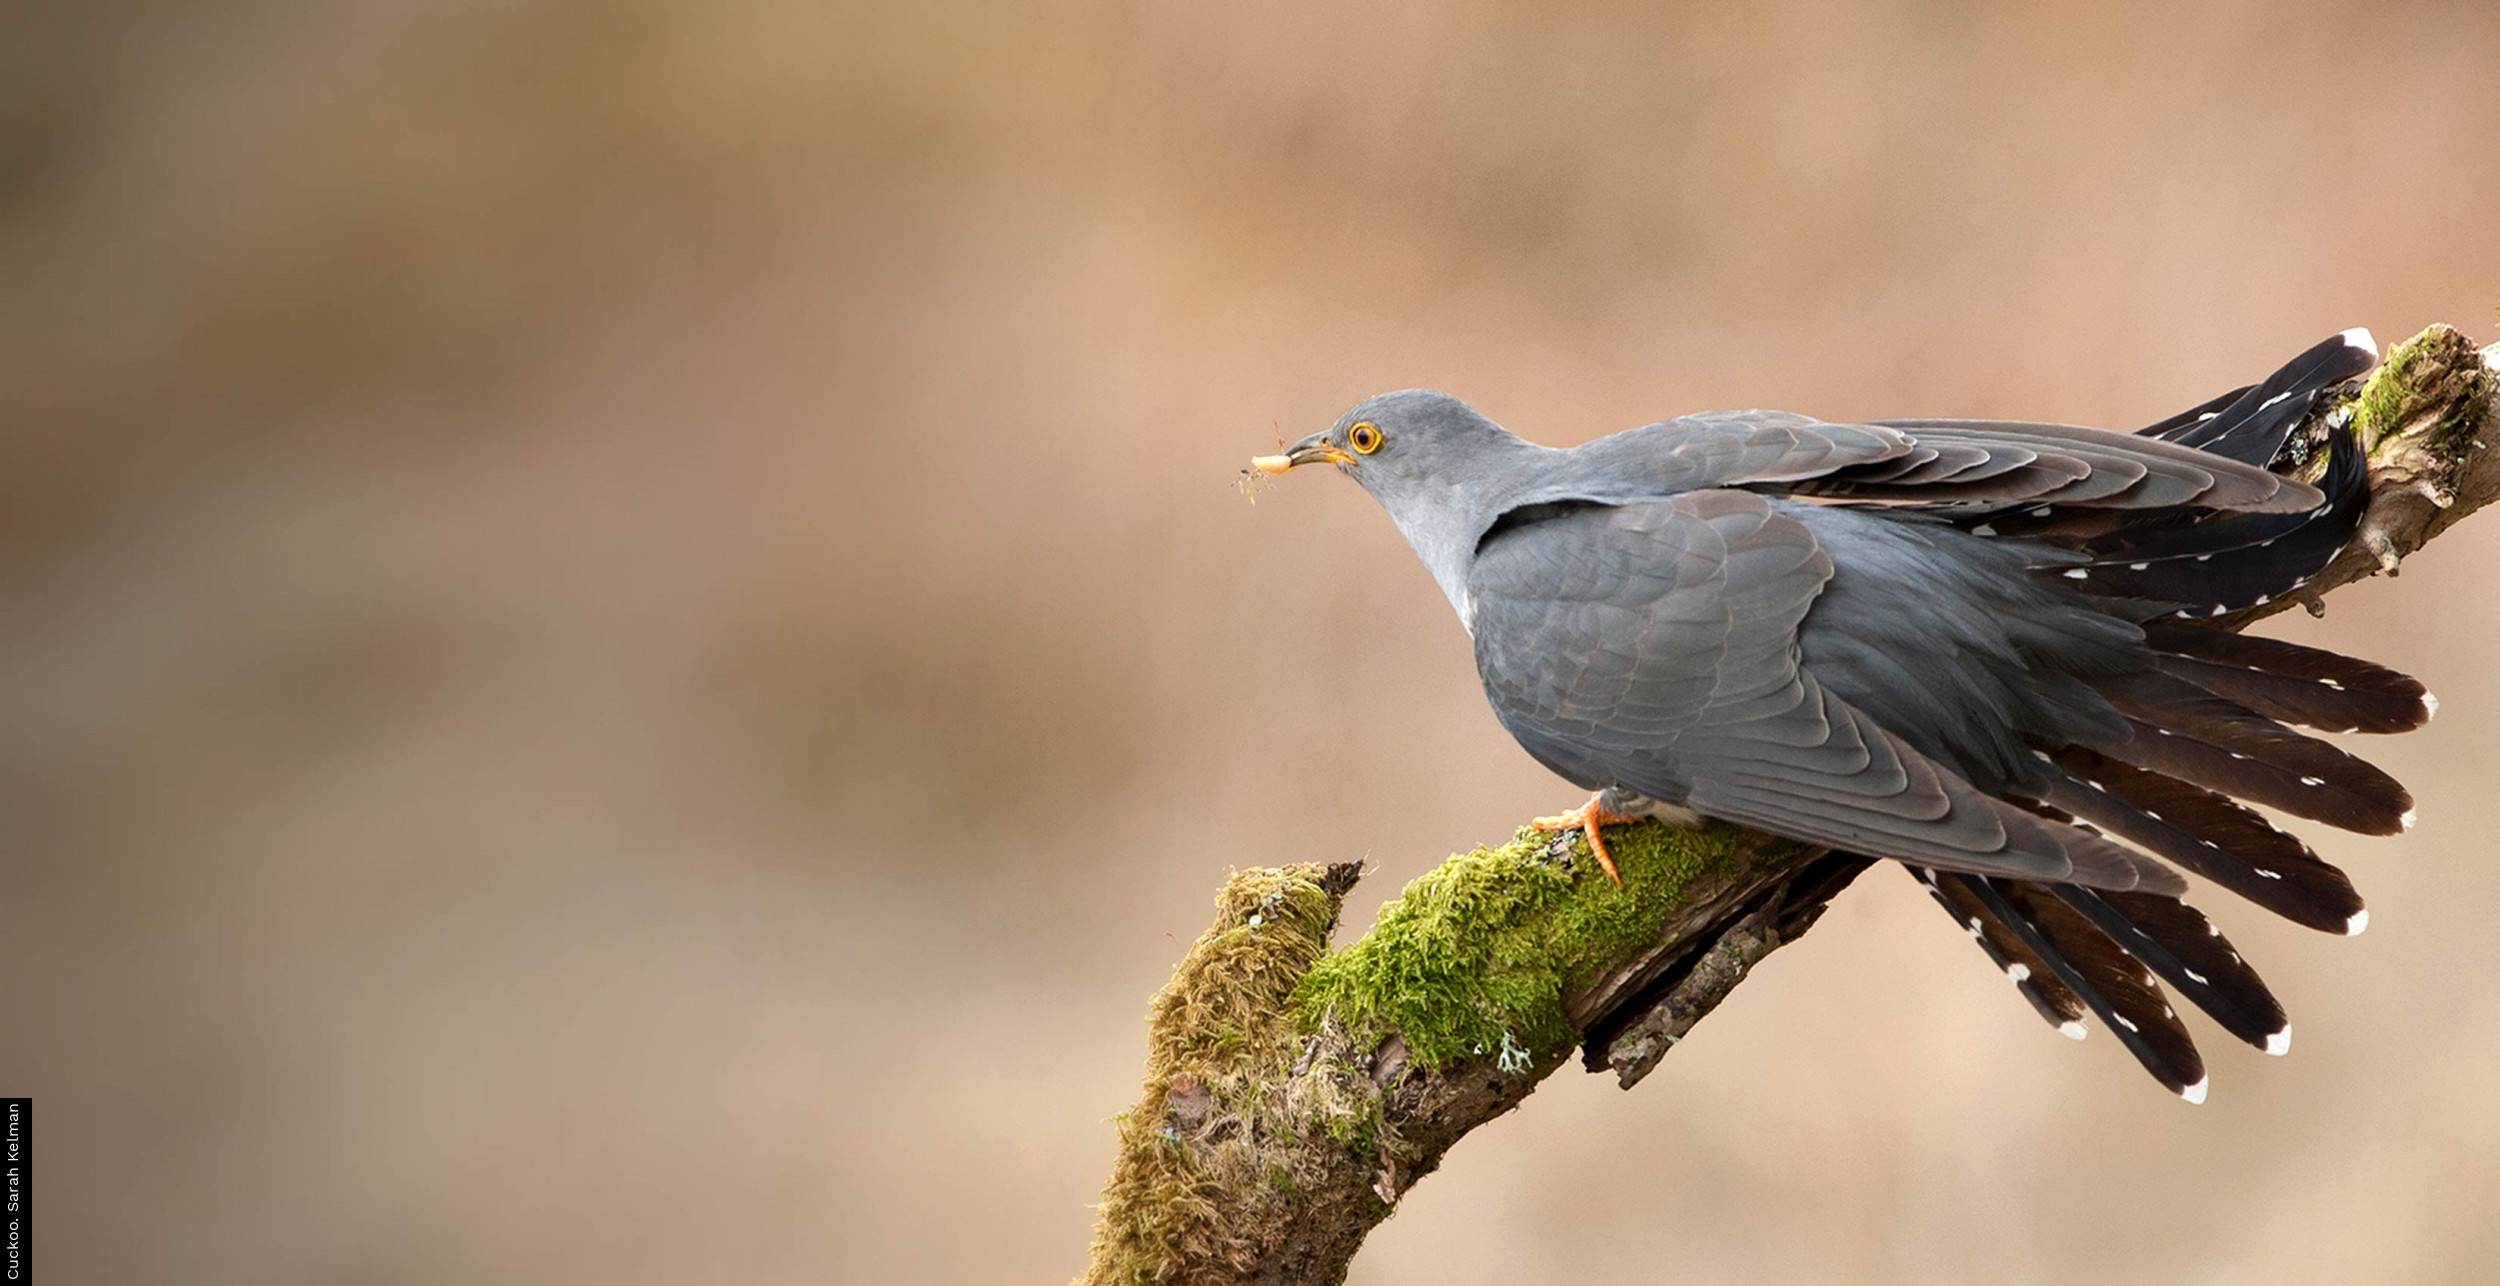 Cuckoo tracking project, Avian research, Migration mysteries, Nature's detectives, 2500x1290 HD Desktop